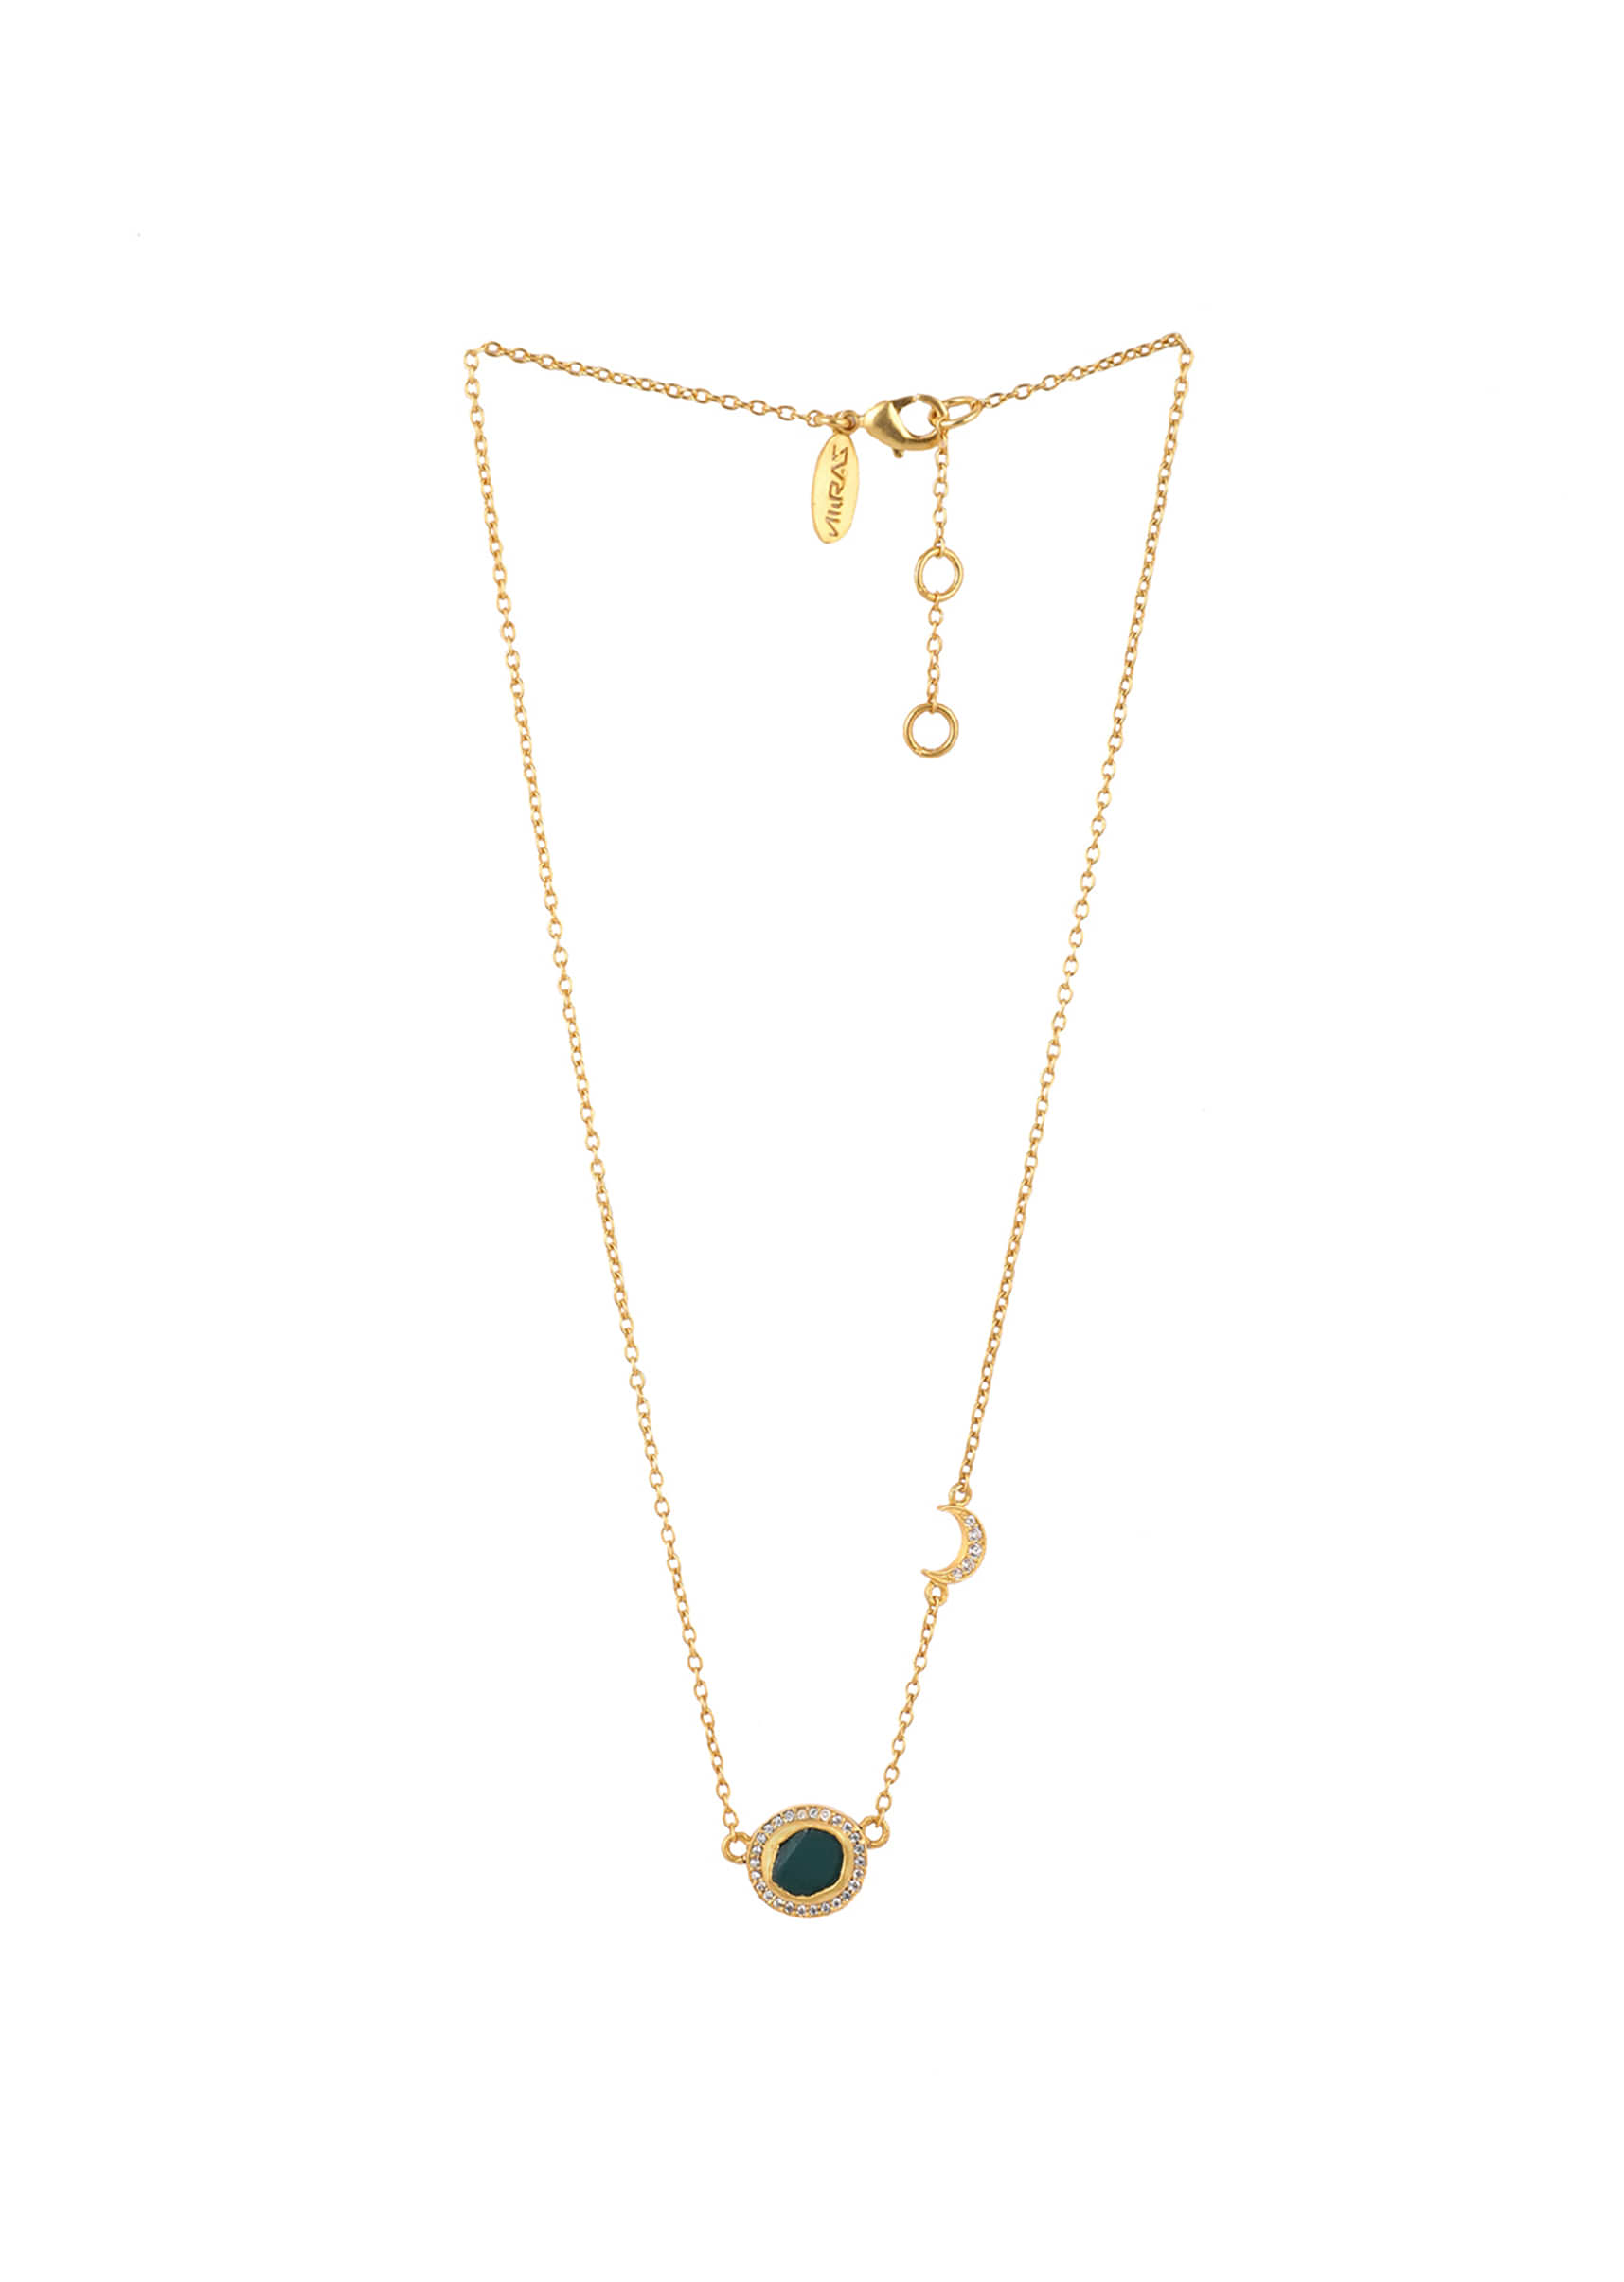 Gold Plated Necklace With Green Chalcedony Pendant And Studded With Cubic Zircons By Zariin